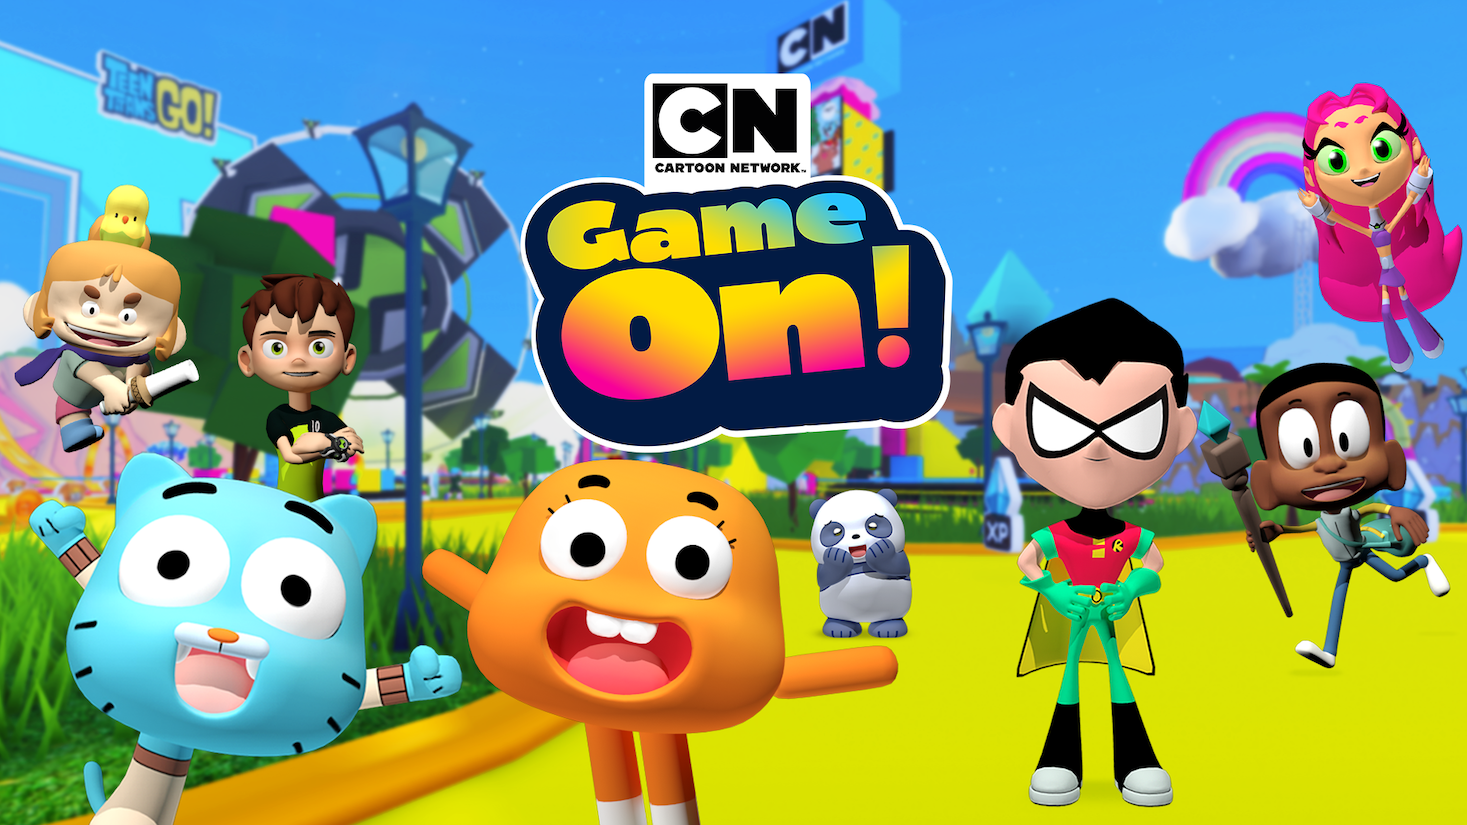 Get Your Game Face On As Cartoon Network Game On! Launches Gumball Haunted House Experience And Tower Of Defence